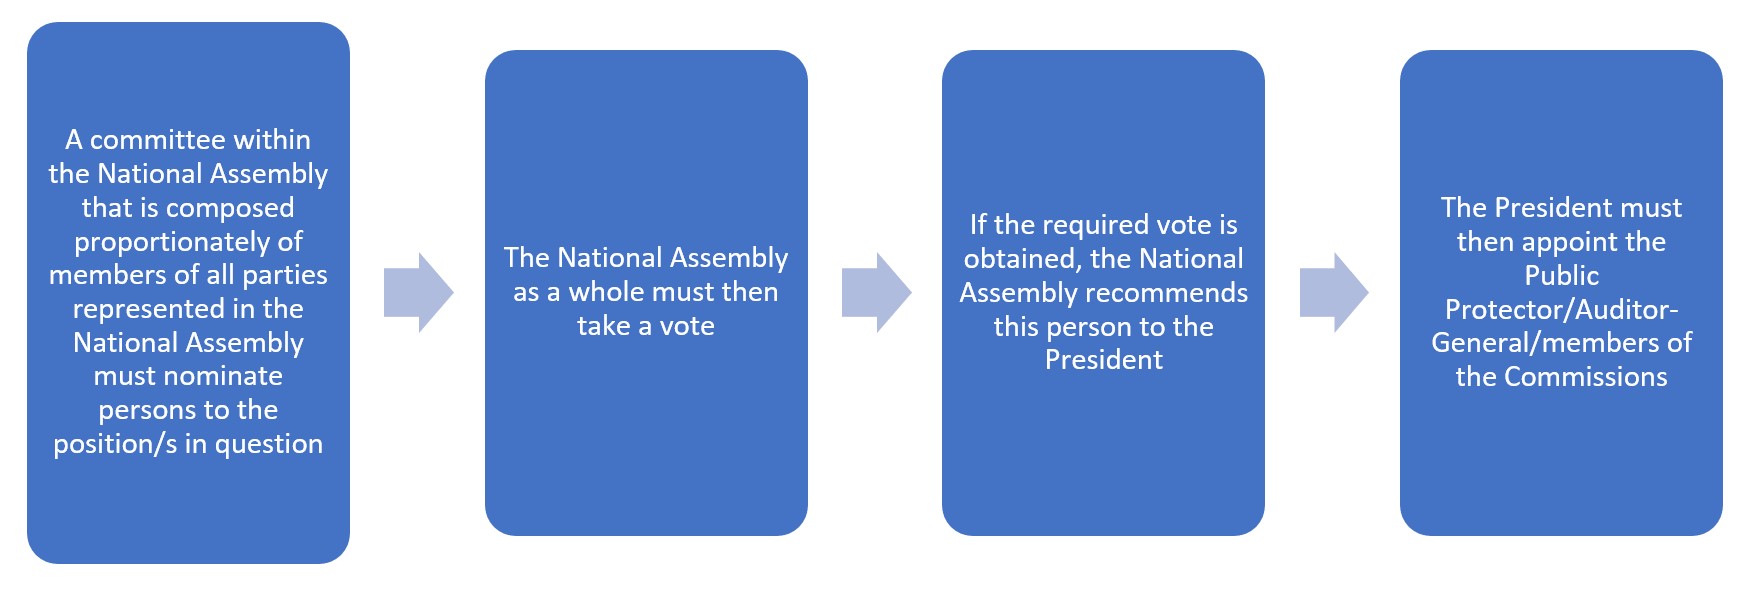 The following block process diagram describes the procedure for filling a position in a chapter 9 institution.

The diagram consists of four blocks with arrows in between them to demonstrate the order of the process.

The first block outlines the first part of the procedure as:

•	A committee within the National Assembly, that is composed proportionately of members of all parties represented in the National Assembly, must nominate persons to the position/s in question.

The second block outlines the second part of the procedure as:
•	The National Assembly, as a whole, then must take a vote.

The third block outlines the third part of the procedure as:
•	If the required vote is obtained, the National Assembly recommends this person to the President.

The fourth block outlines the last part of the procedure as:
•	The President must then appoint the Public Protector/Auditor-General/members of the Commissions.
